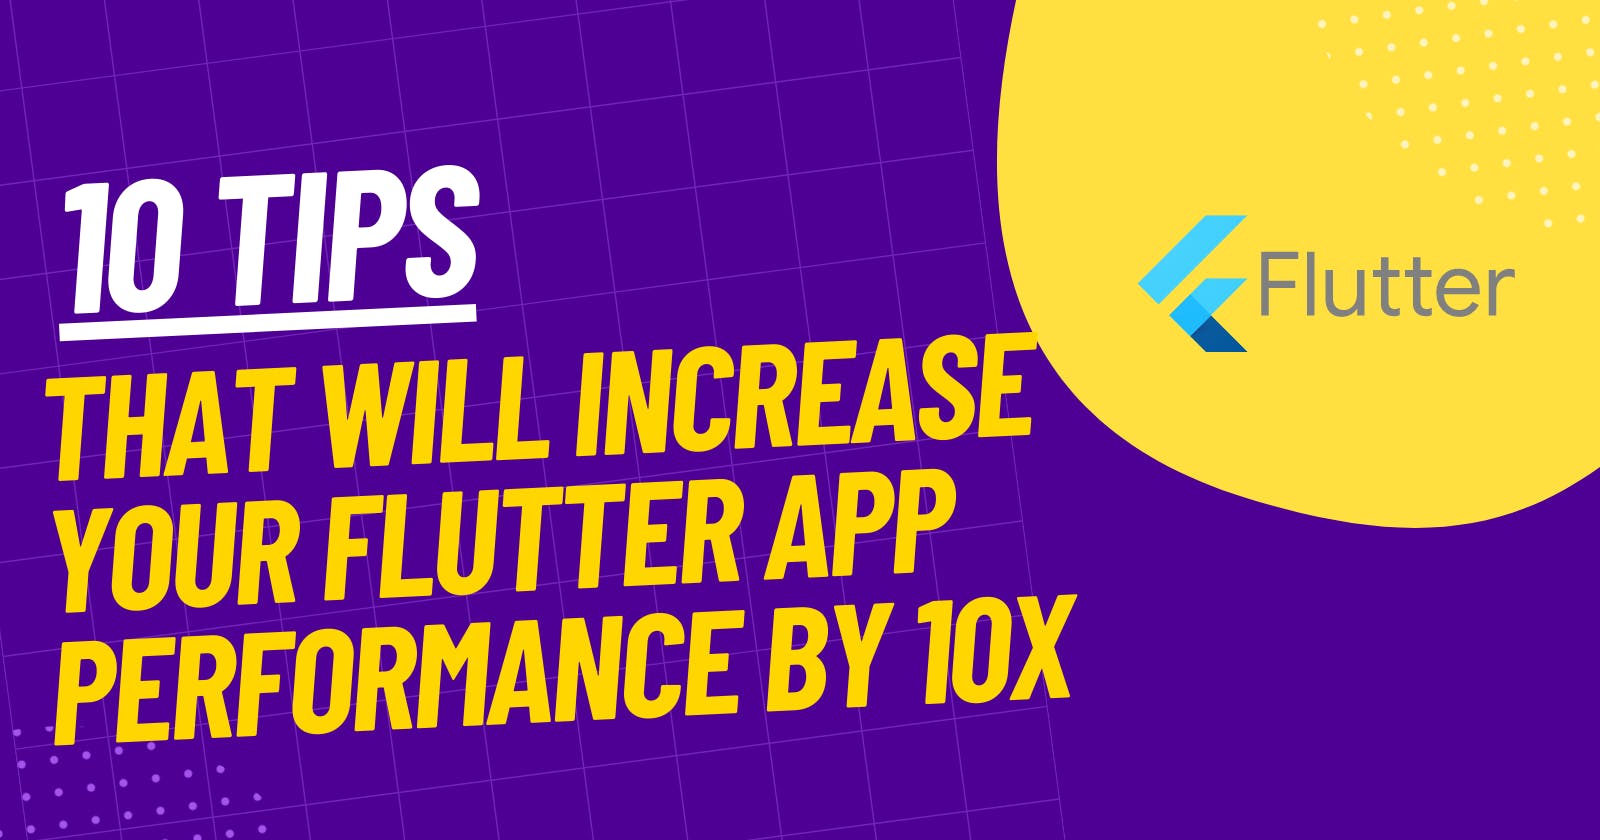 10 Tips That Will Increase Your Flutter App Performance By 10X